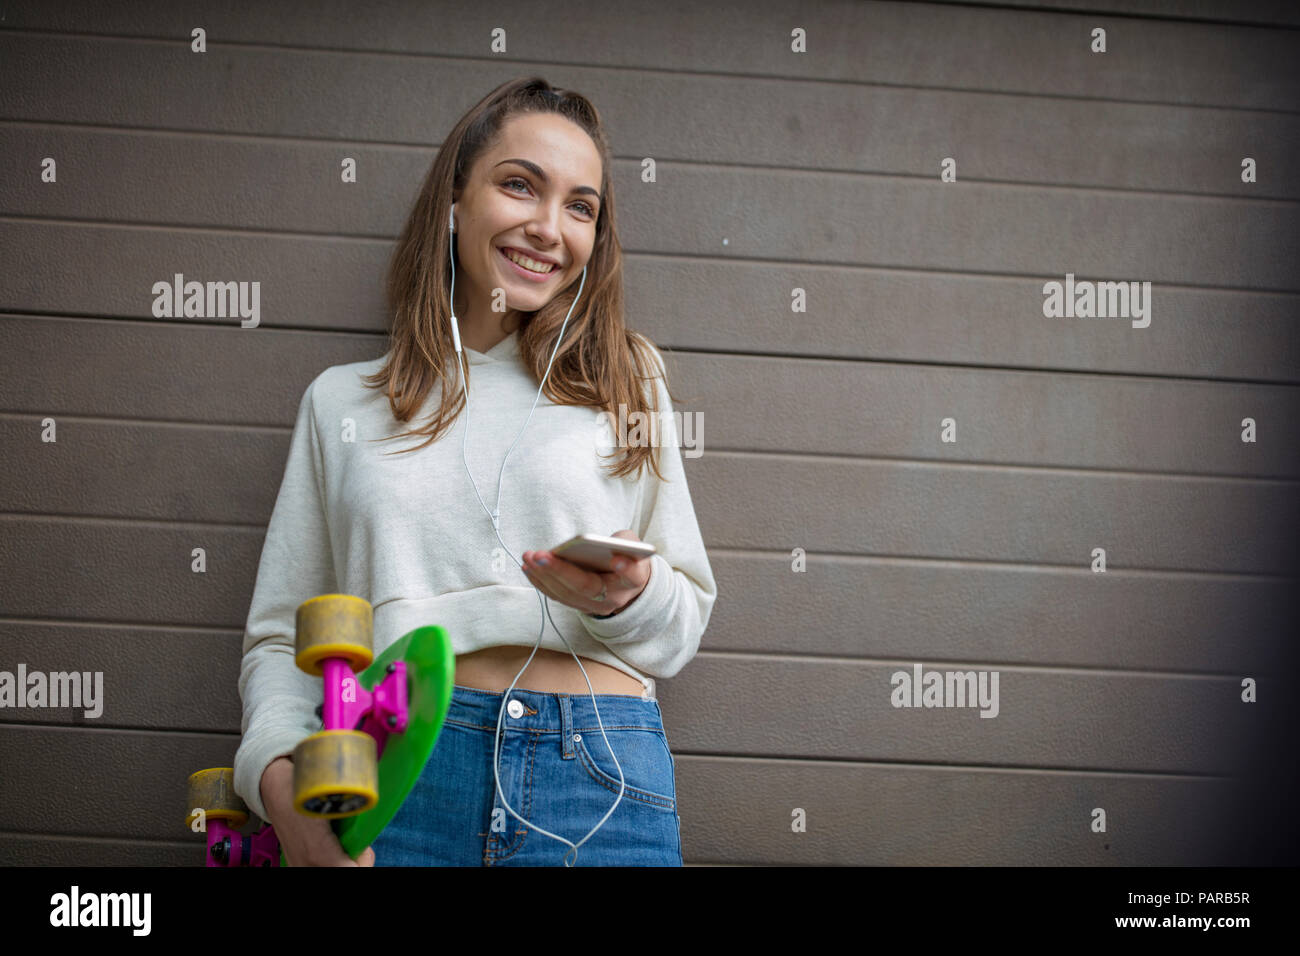 Smiling teenage girl with cell phone, earphones and skateboard Stock Photo